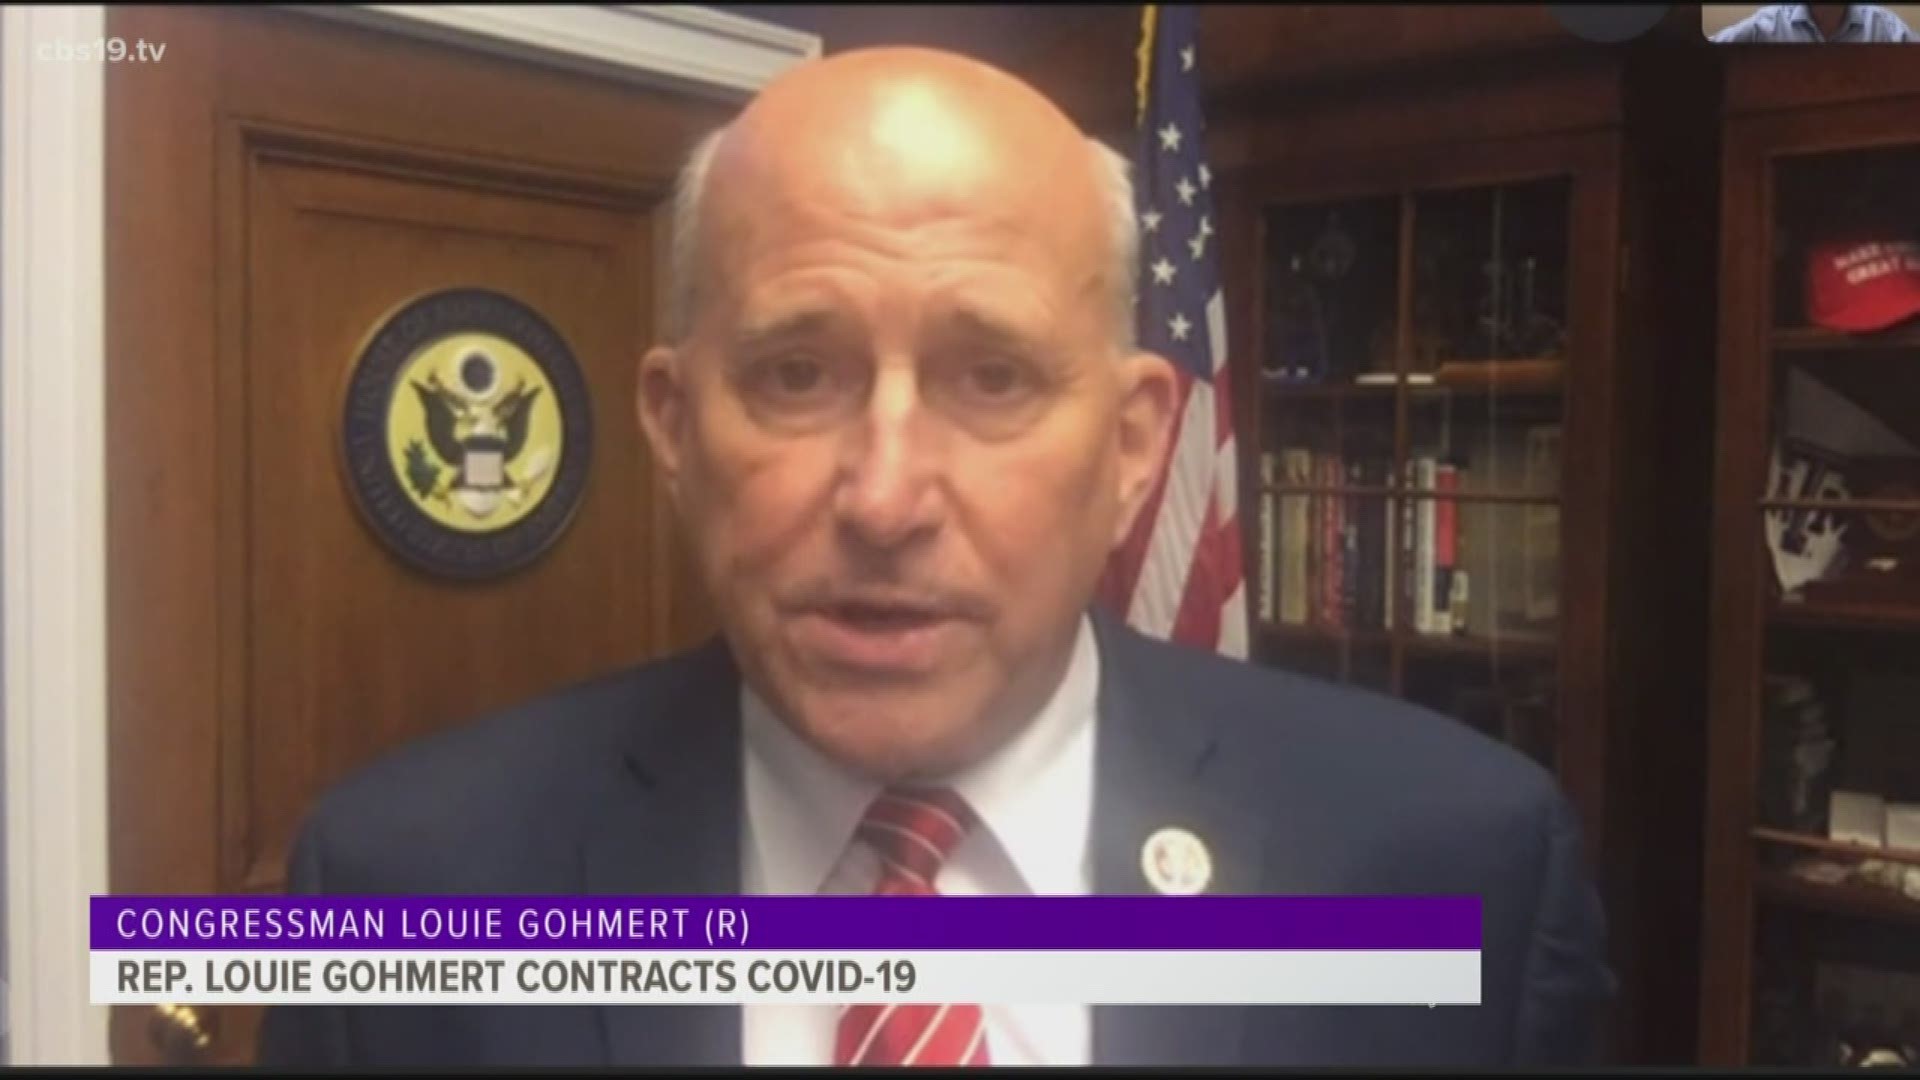 Politico reports Gohmert was scheduled to fly to Texas Wednesday with President Donald Trump, but he tested positive in a pre-screen at the White House.